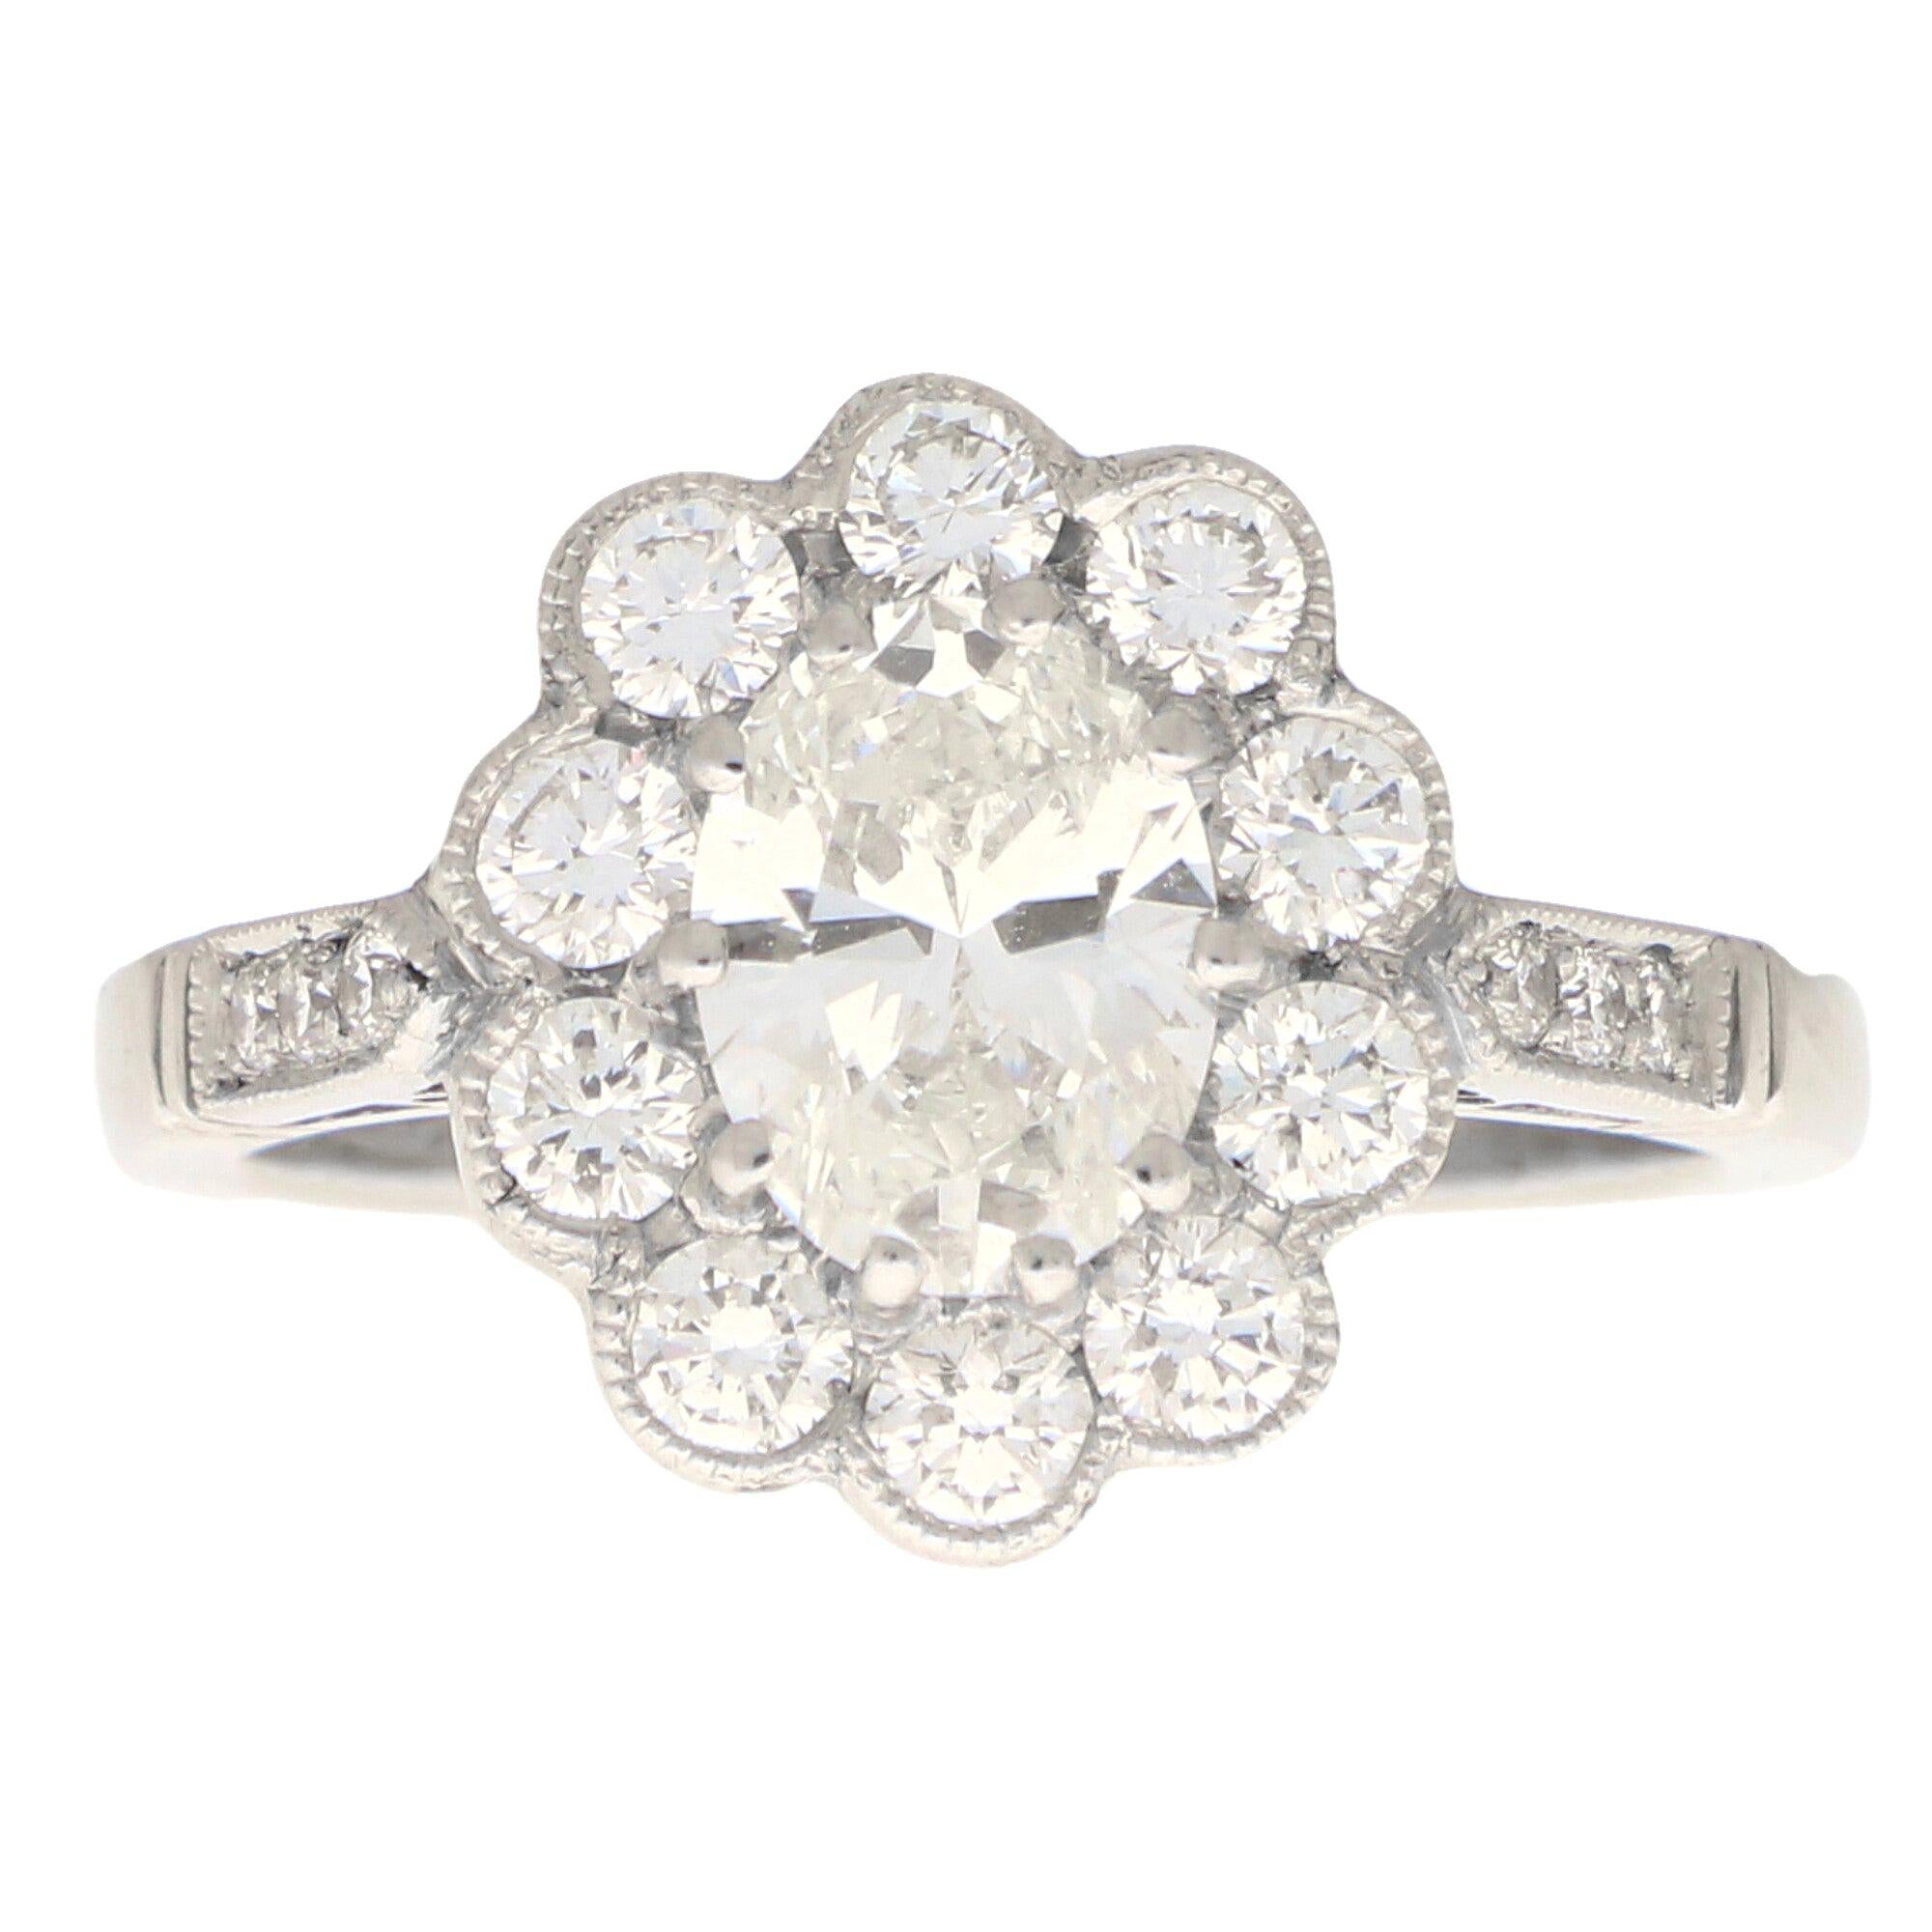 Oval Diamond Cluster Halo Engagement Ring Set in Platinum